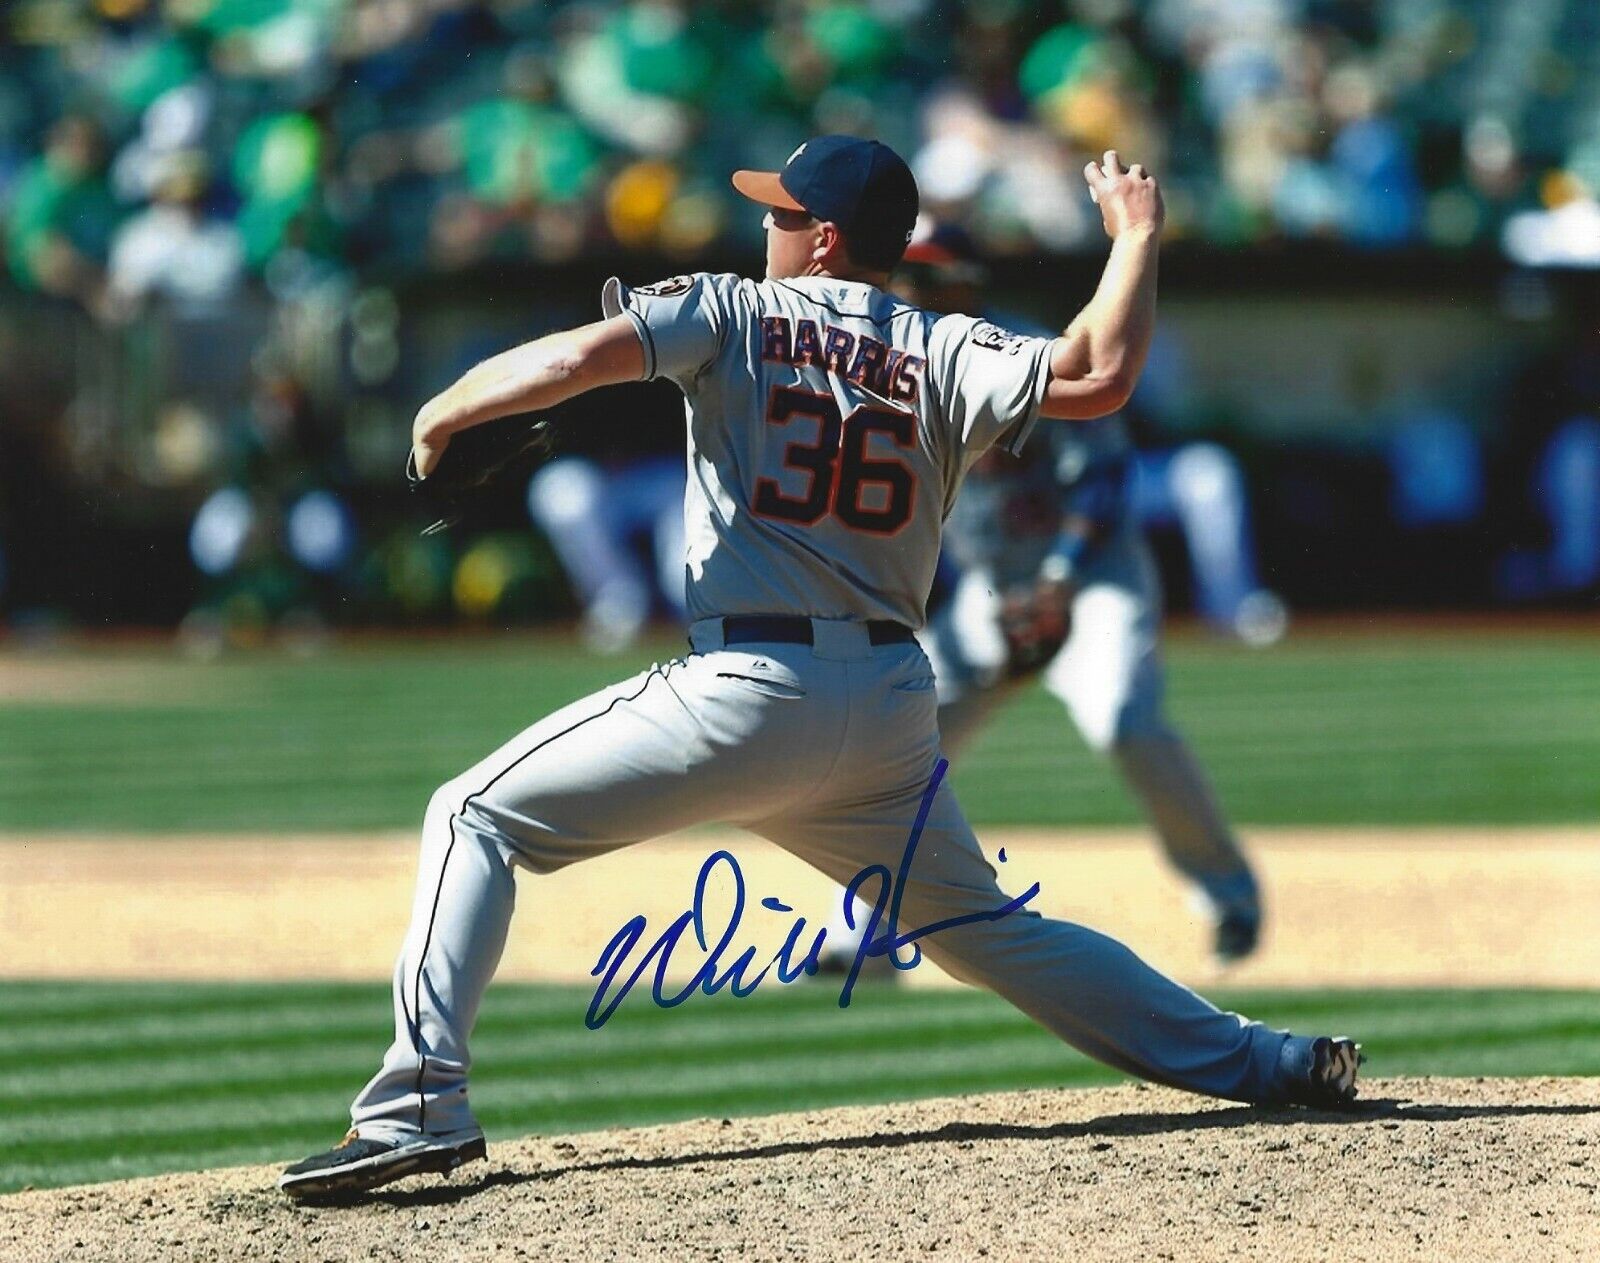 Signed 8x10 WILL HARRIS Houston Astros Autographed Photo Poster painting - w/COA